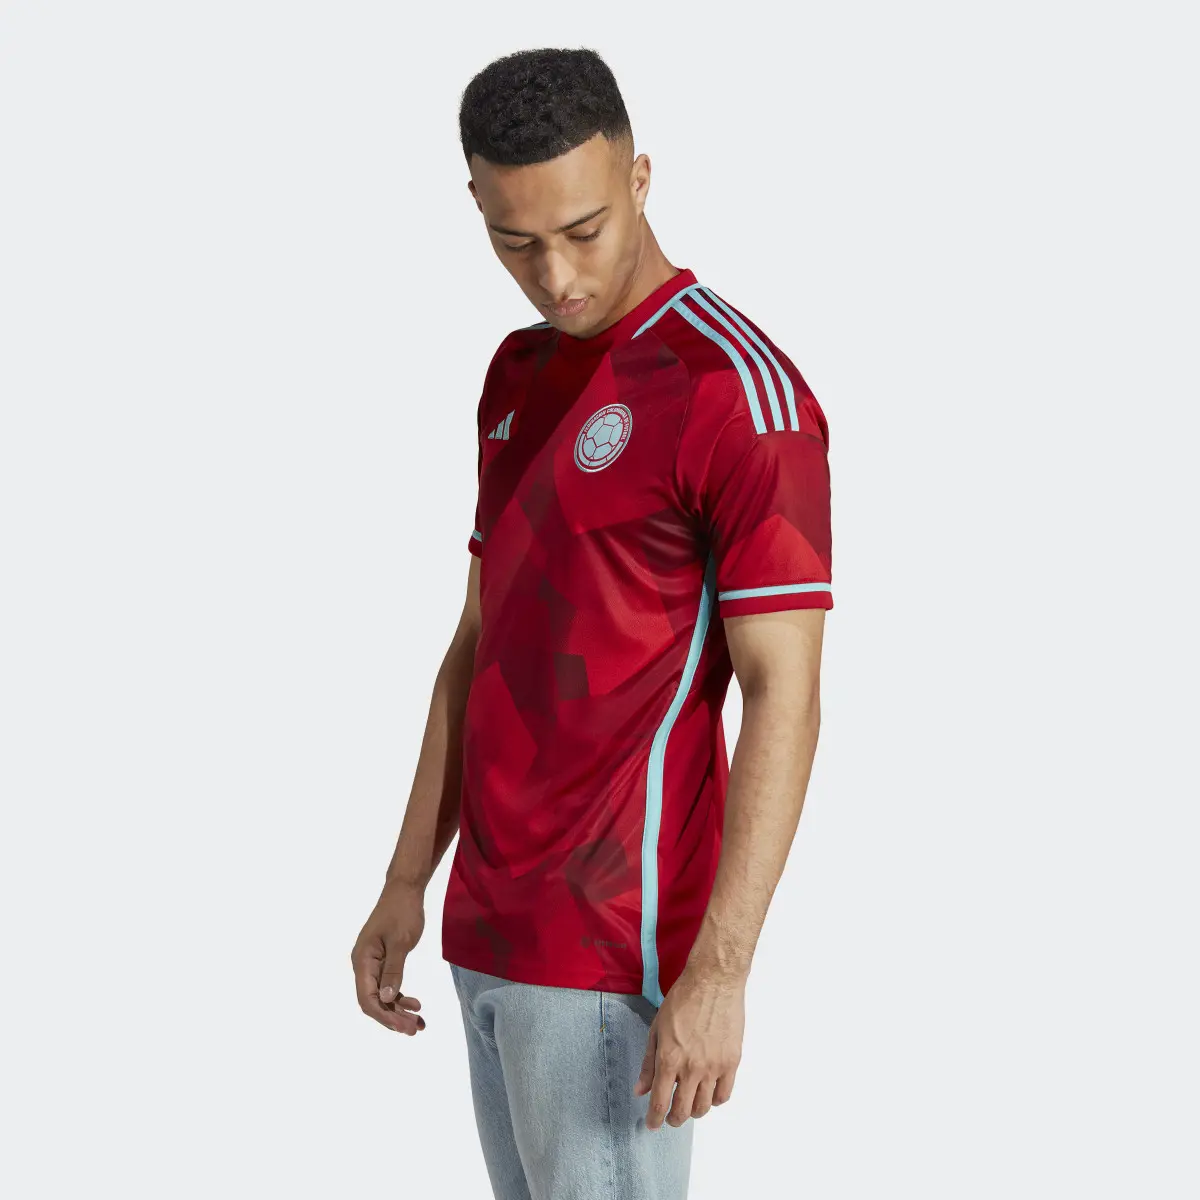 Adidas Colombia 22 Away Jersey. 3